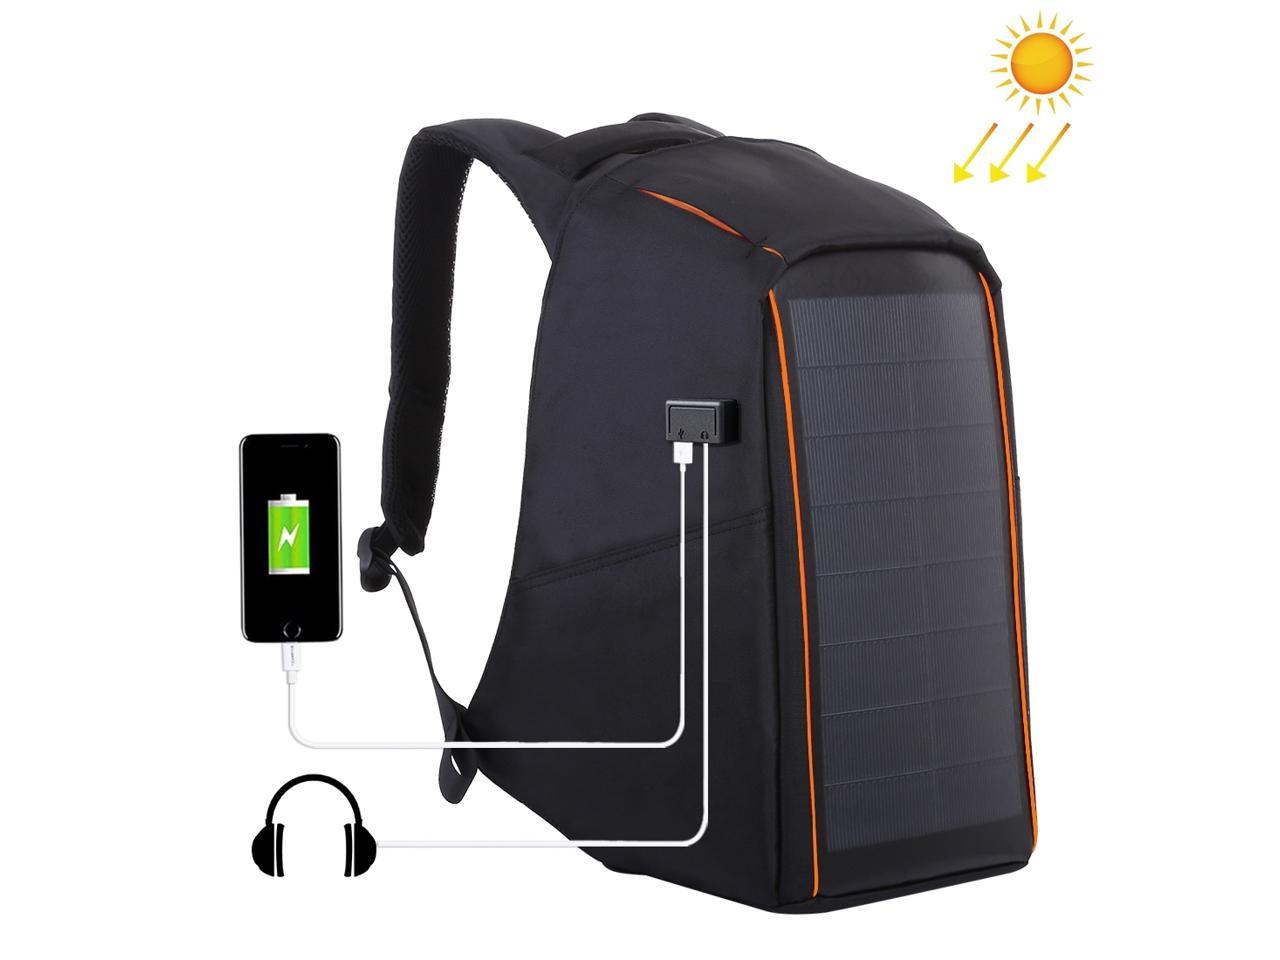 HAWEEL 12W Flexible Solar Panel Power Backpack Anti-Theft Bag with Handle and 5V Black 2.1A Max Dual USB Charging Port